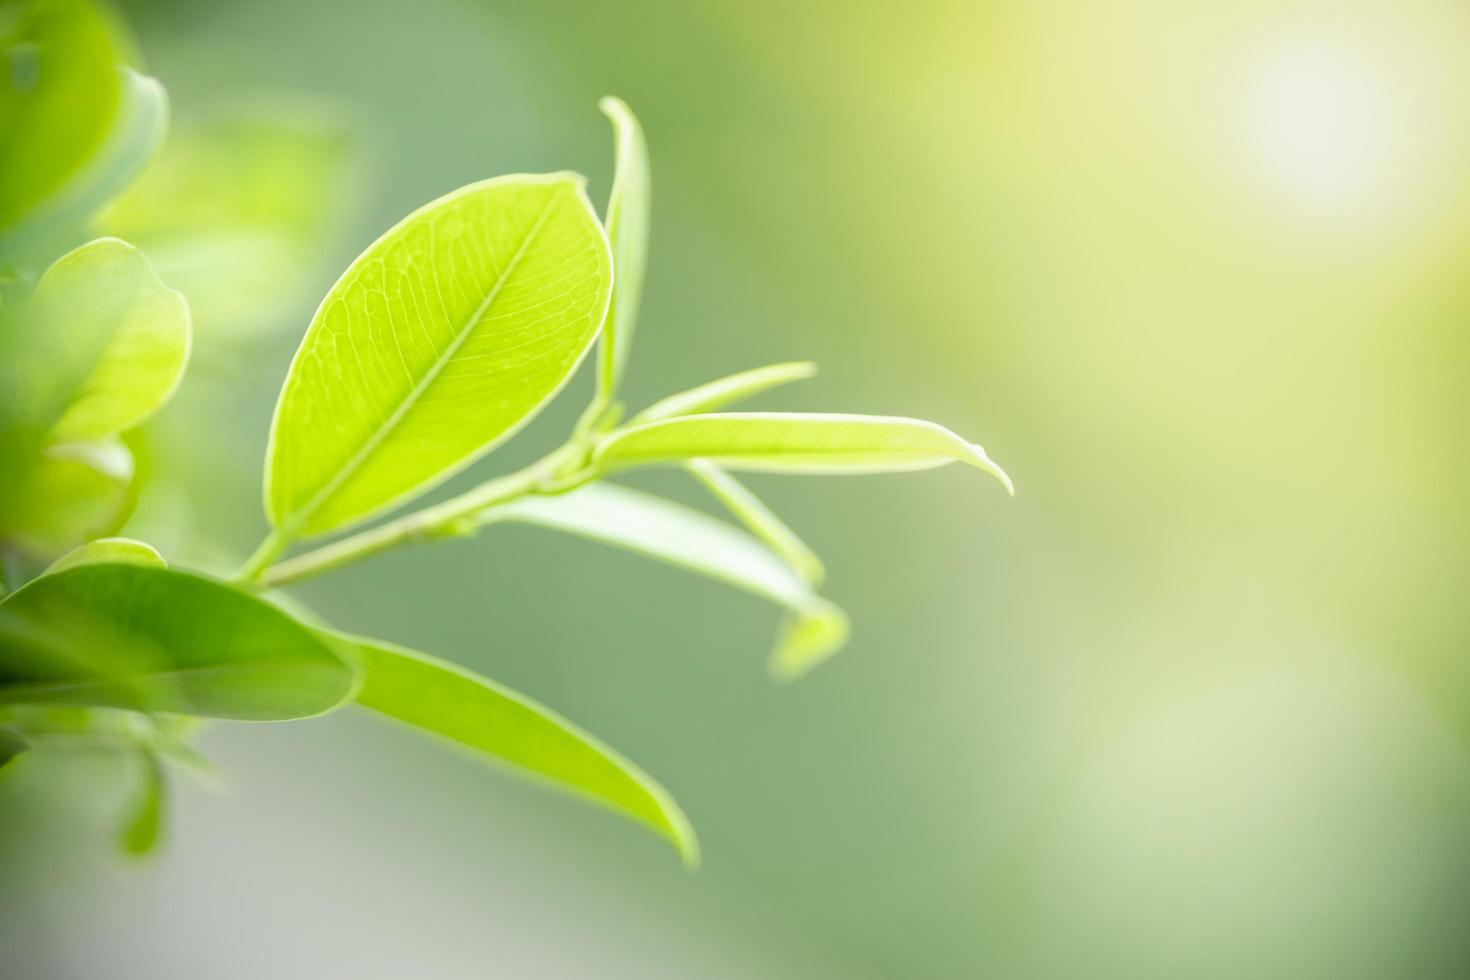 Close up of nature view green leaf on blurred greenery background under sunlight with bokeh and copy space using as background natural plants landscape, ecology wallpaper concept. photo